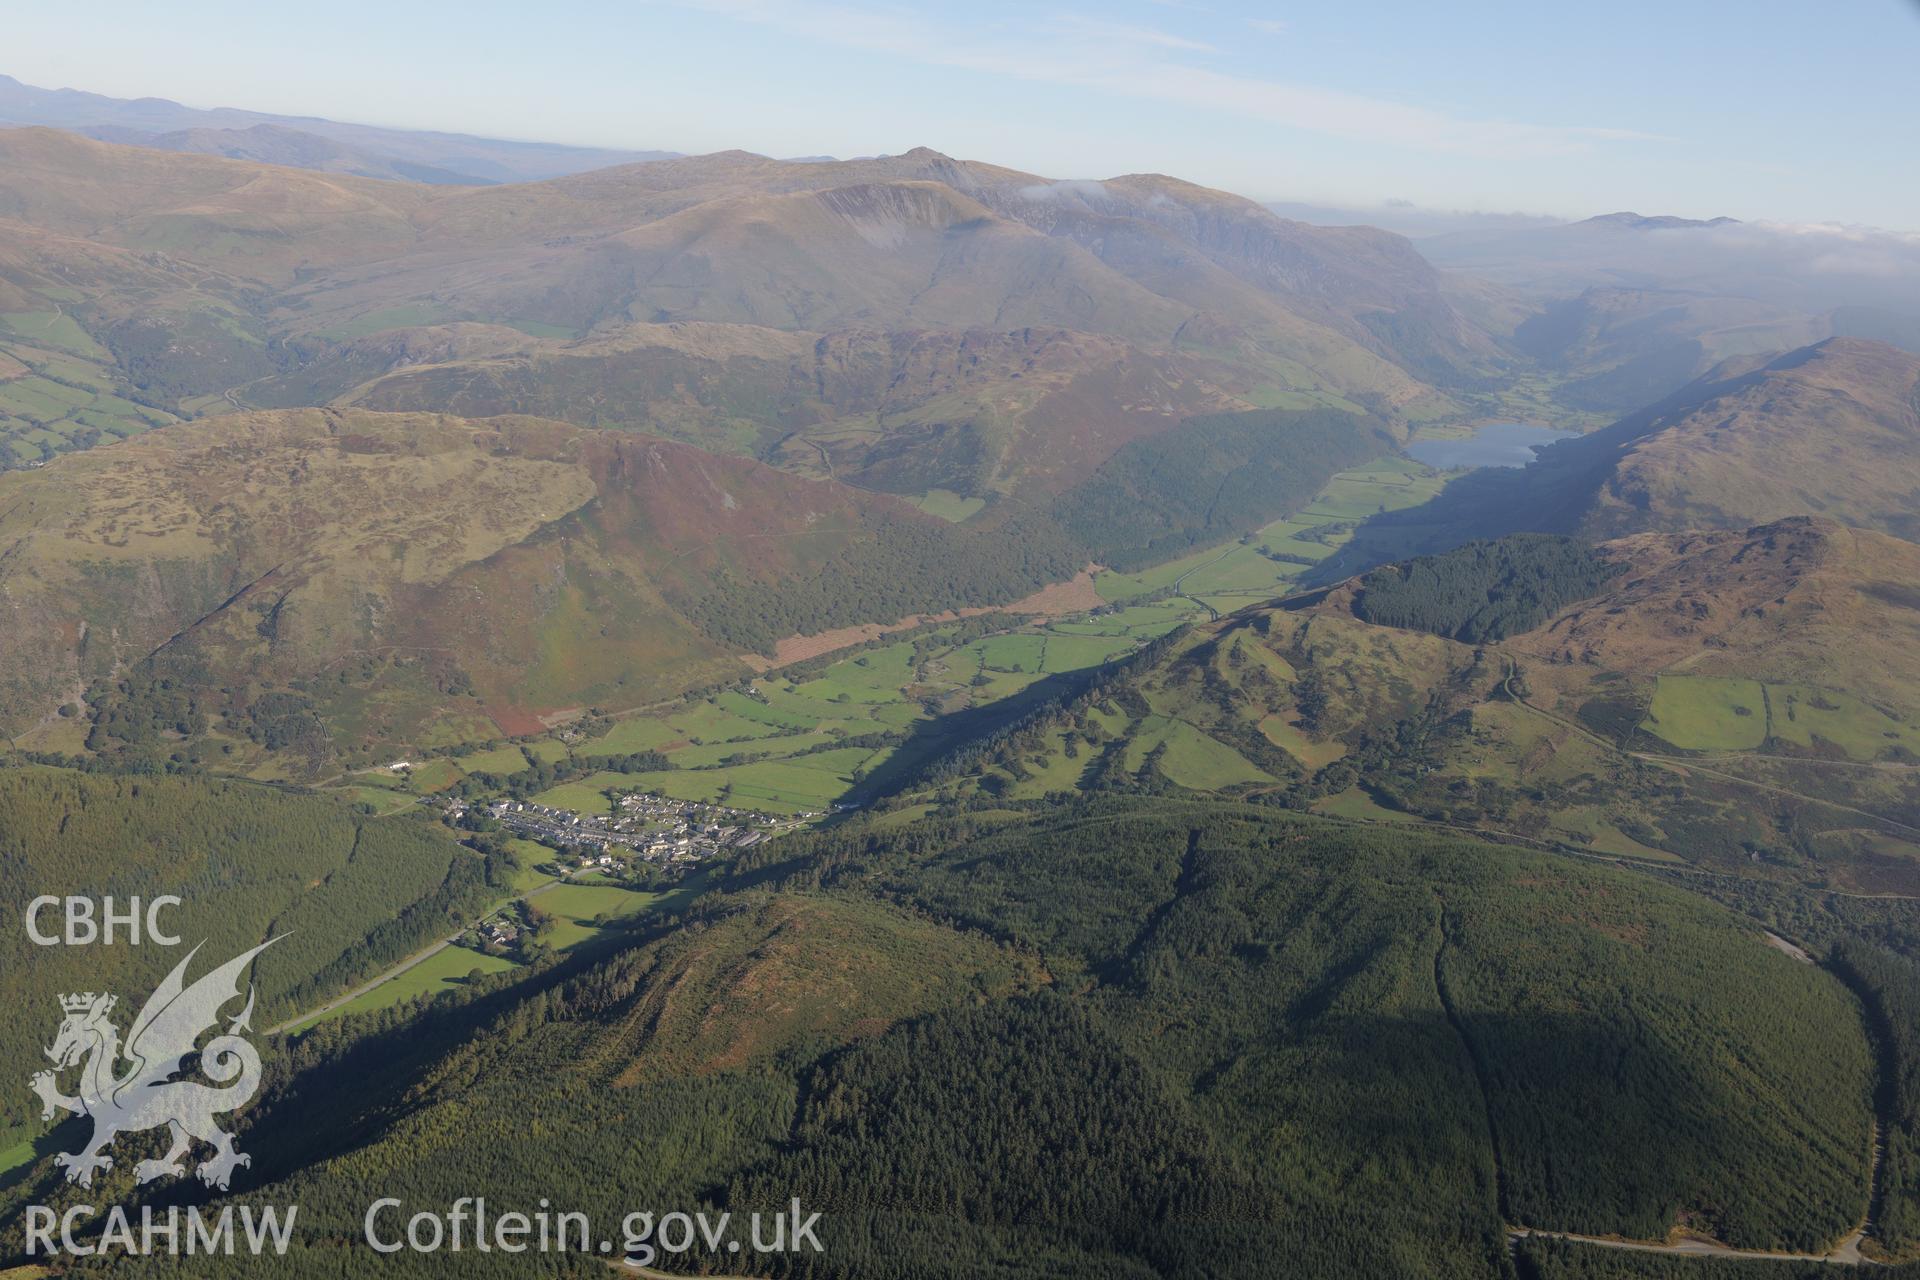 Abergynolwyn with Tal-y-Llyn lake beyond. Oblique aerial photograph taken during the Royal Commission's programme of archaeological aerial reconnaissance by Toby Driver on 2nd October 2015.